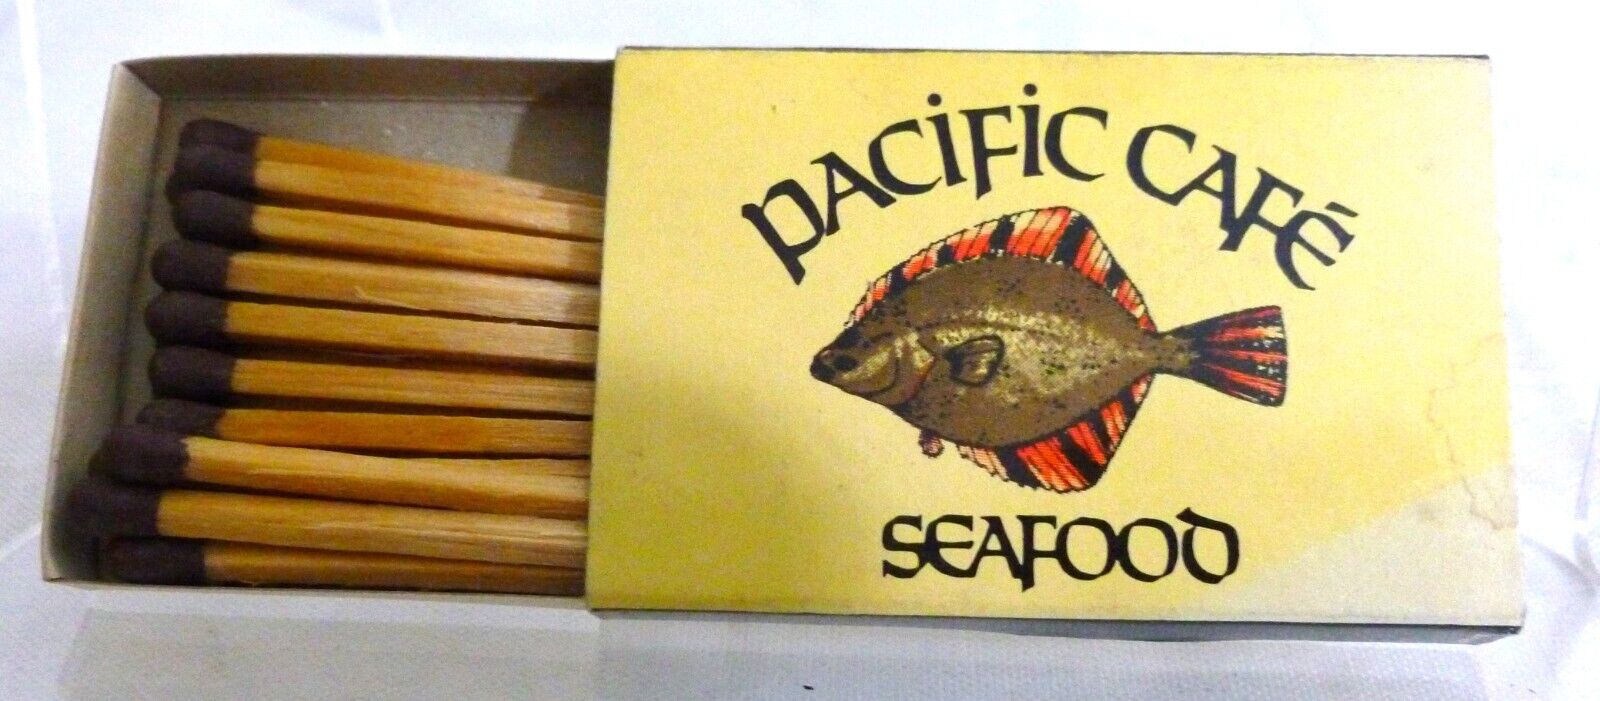 Vintage Matchbox Unstruck - Pacific Care Seafood - North Point San Francisco, Ca